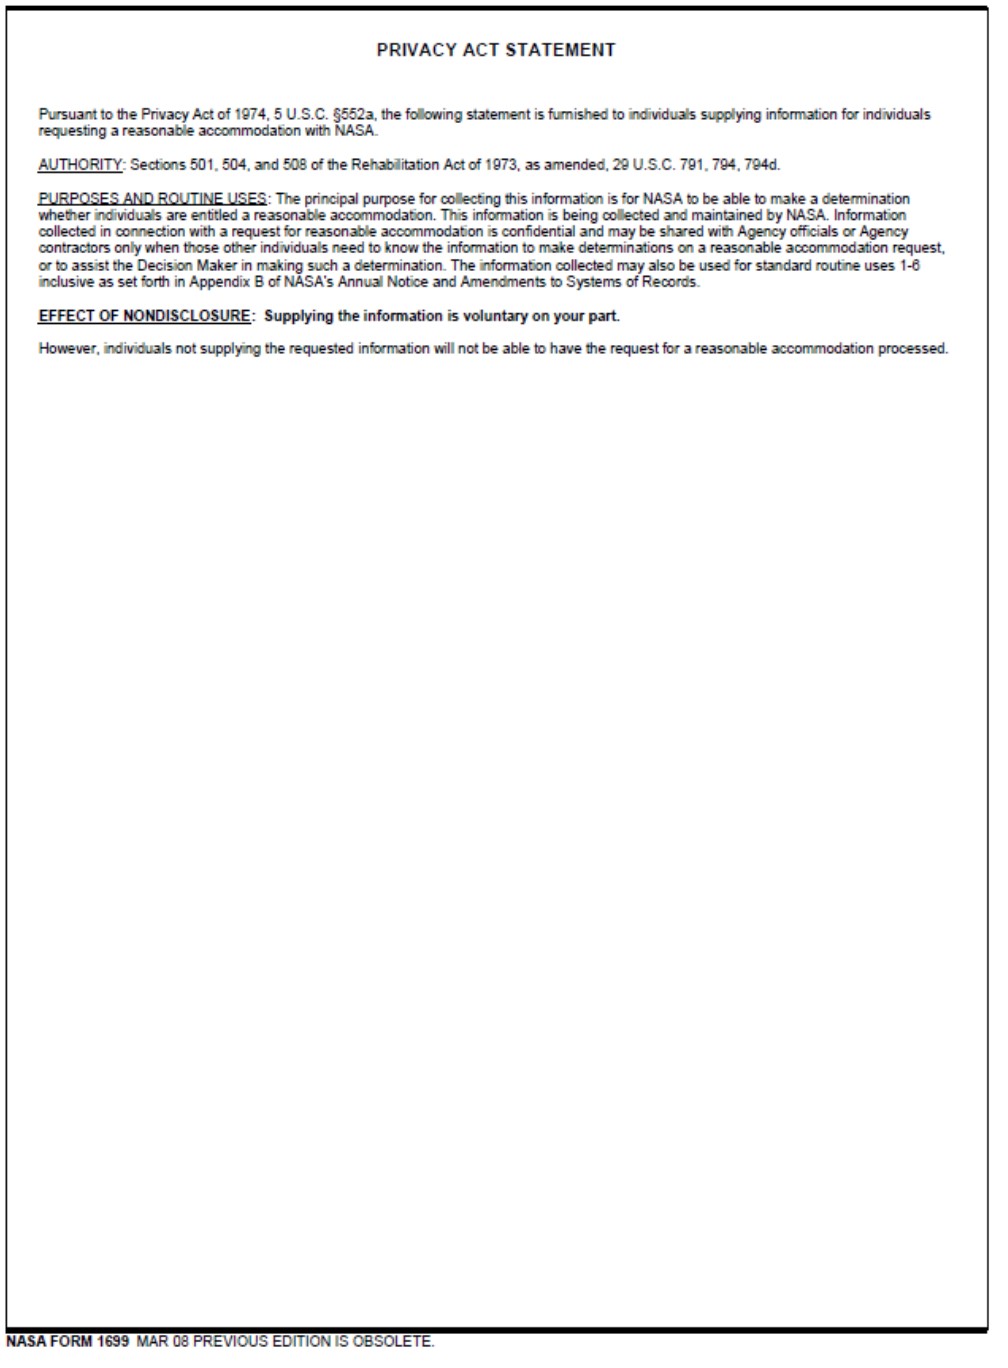 Figure F.1 image shows page 2 of the NF1699 Confirmation of Request for Reasonable Accommodation.